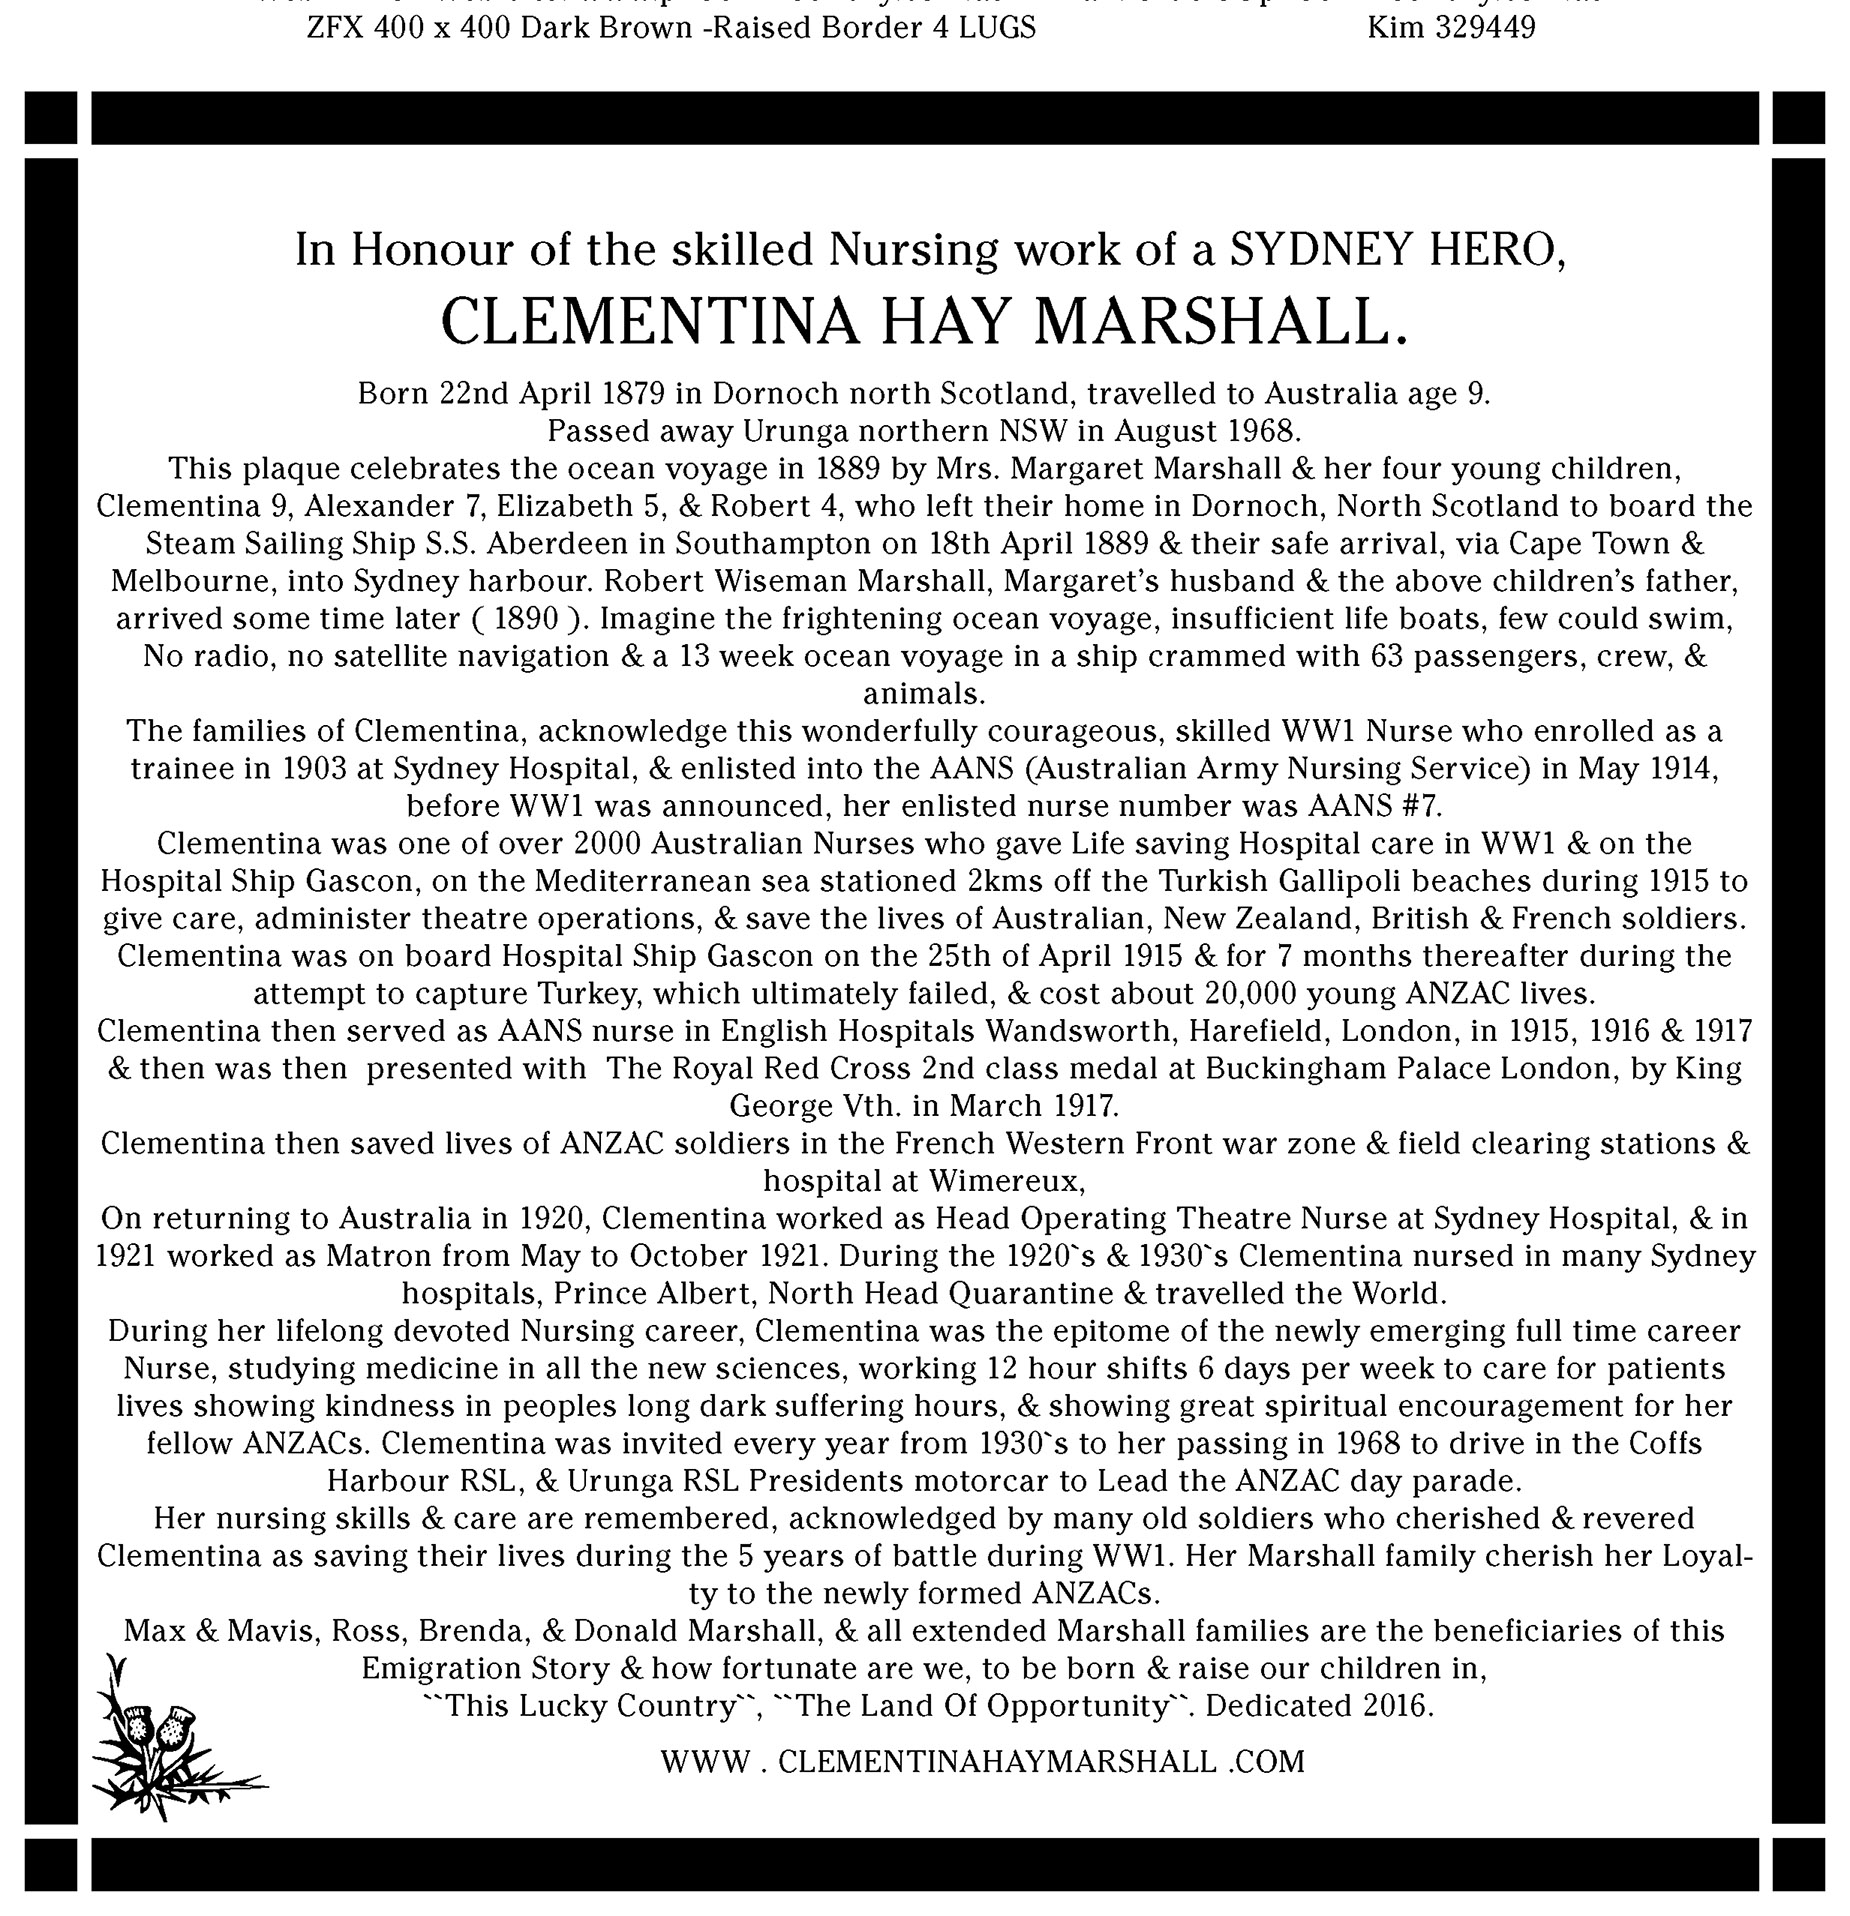 LAYOUT OF HISTORICAL PLATE MADE IN BRONZE FOR CLEMENTINA MARSHALL GRAVESITE AT URUNGA NSW AUSTRALIA 